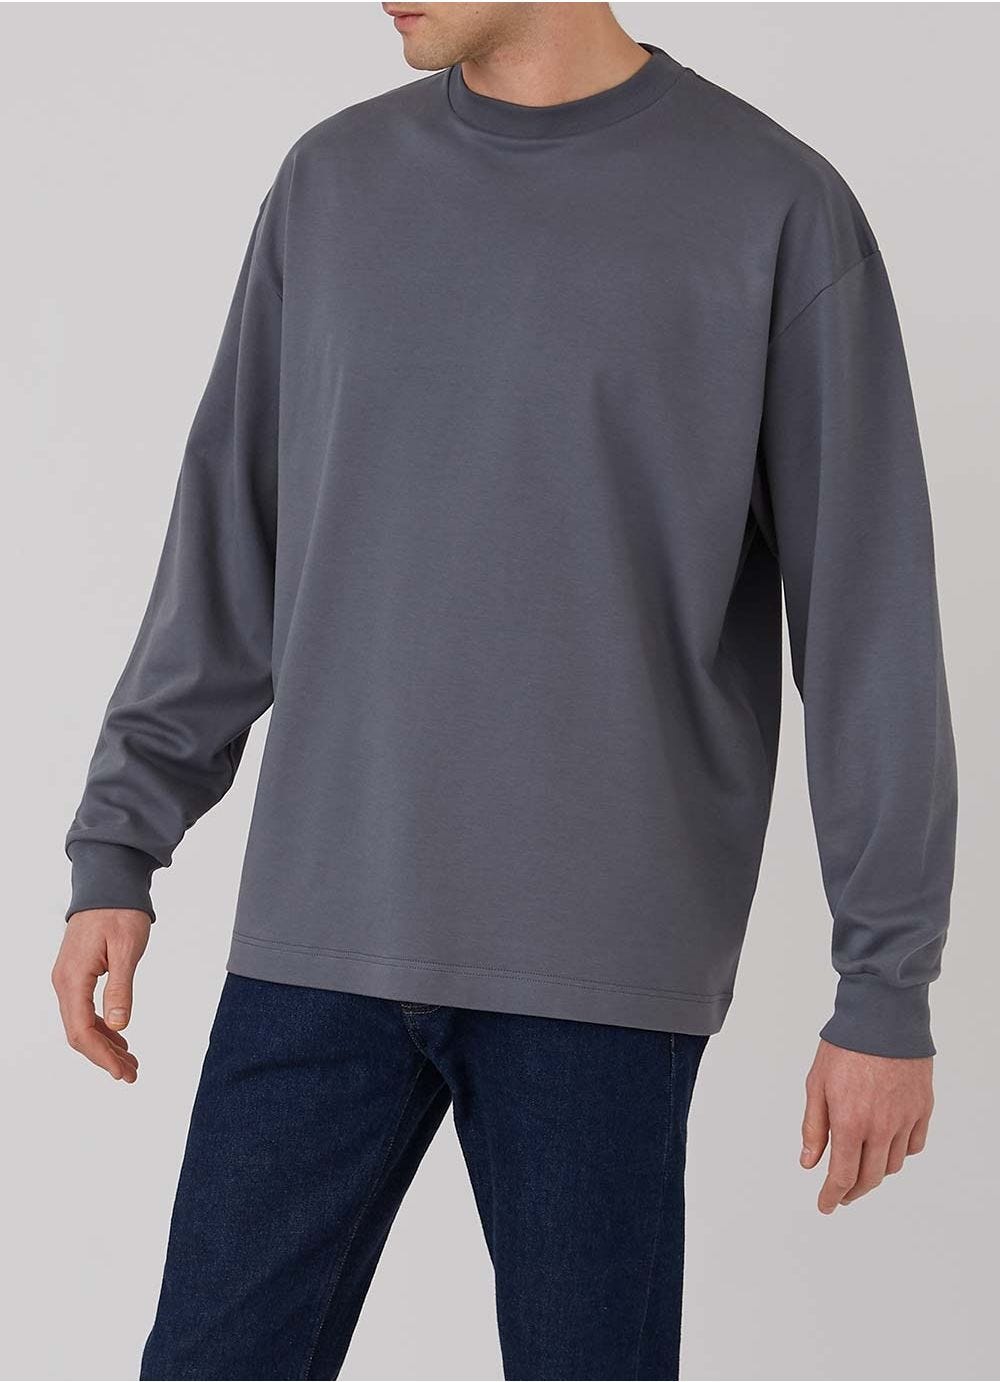 Beams and Sunspel Men's Brushed Cotton Oversized Long Sleeve T-Shirt in  Charcoal | Sunspel